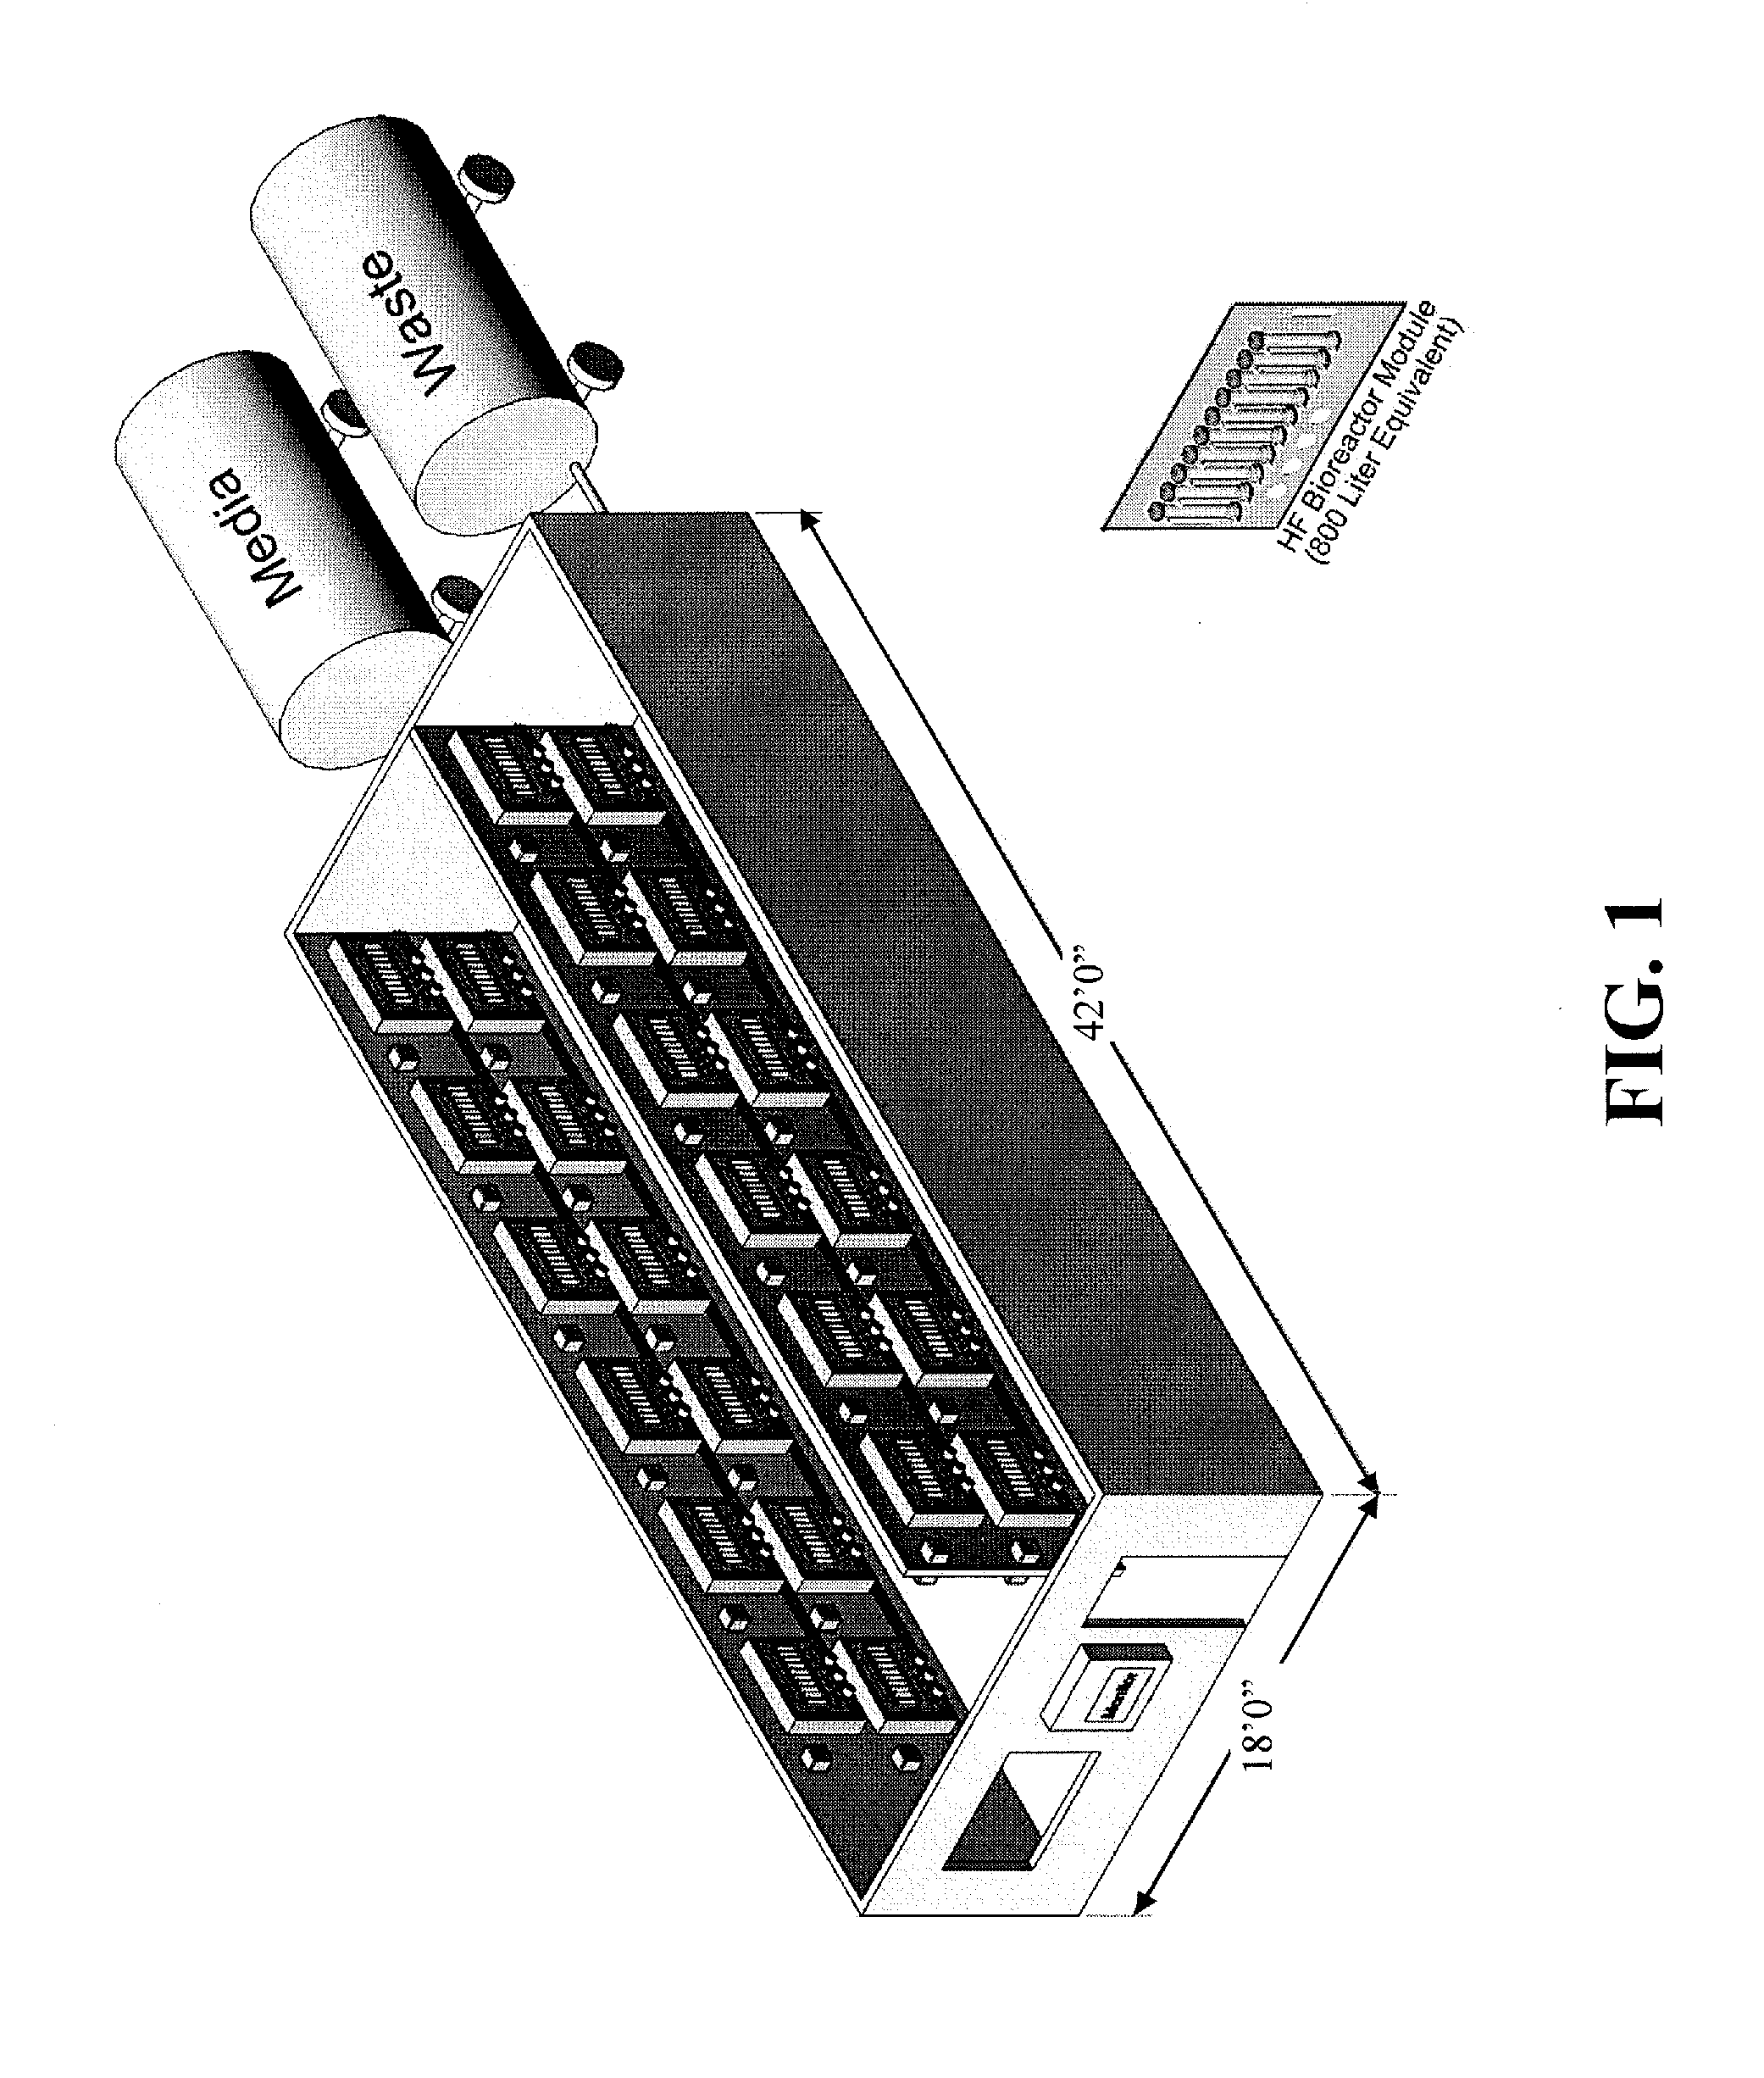 Biomanufacturing suite and methods for large-scale production of cells, viruses, and biomolecules